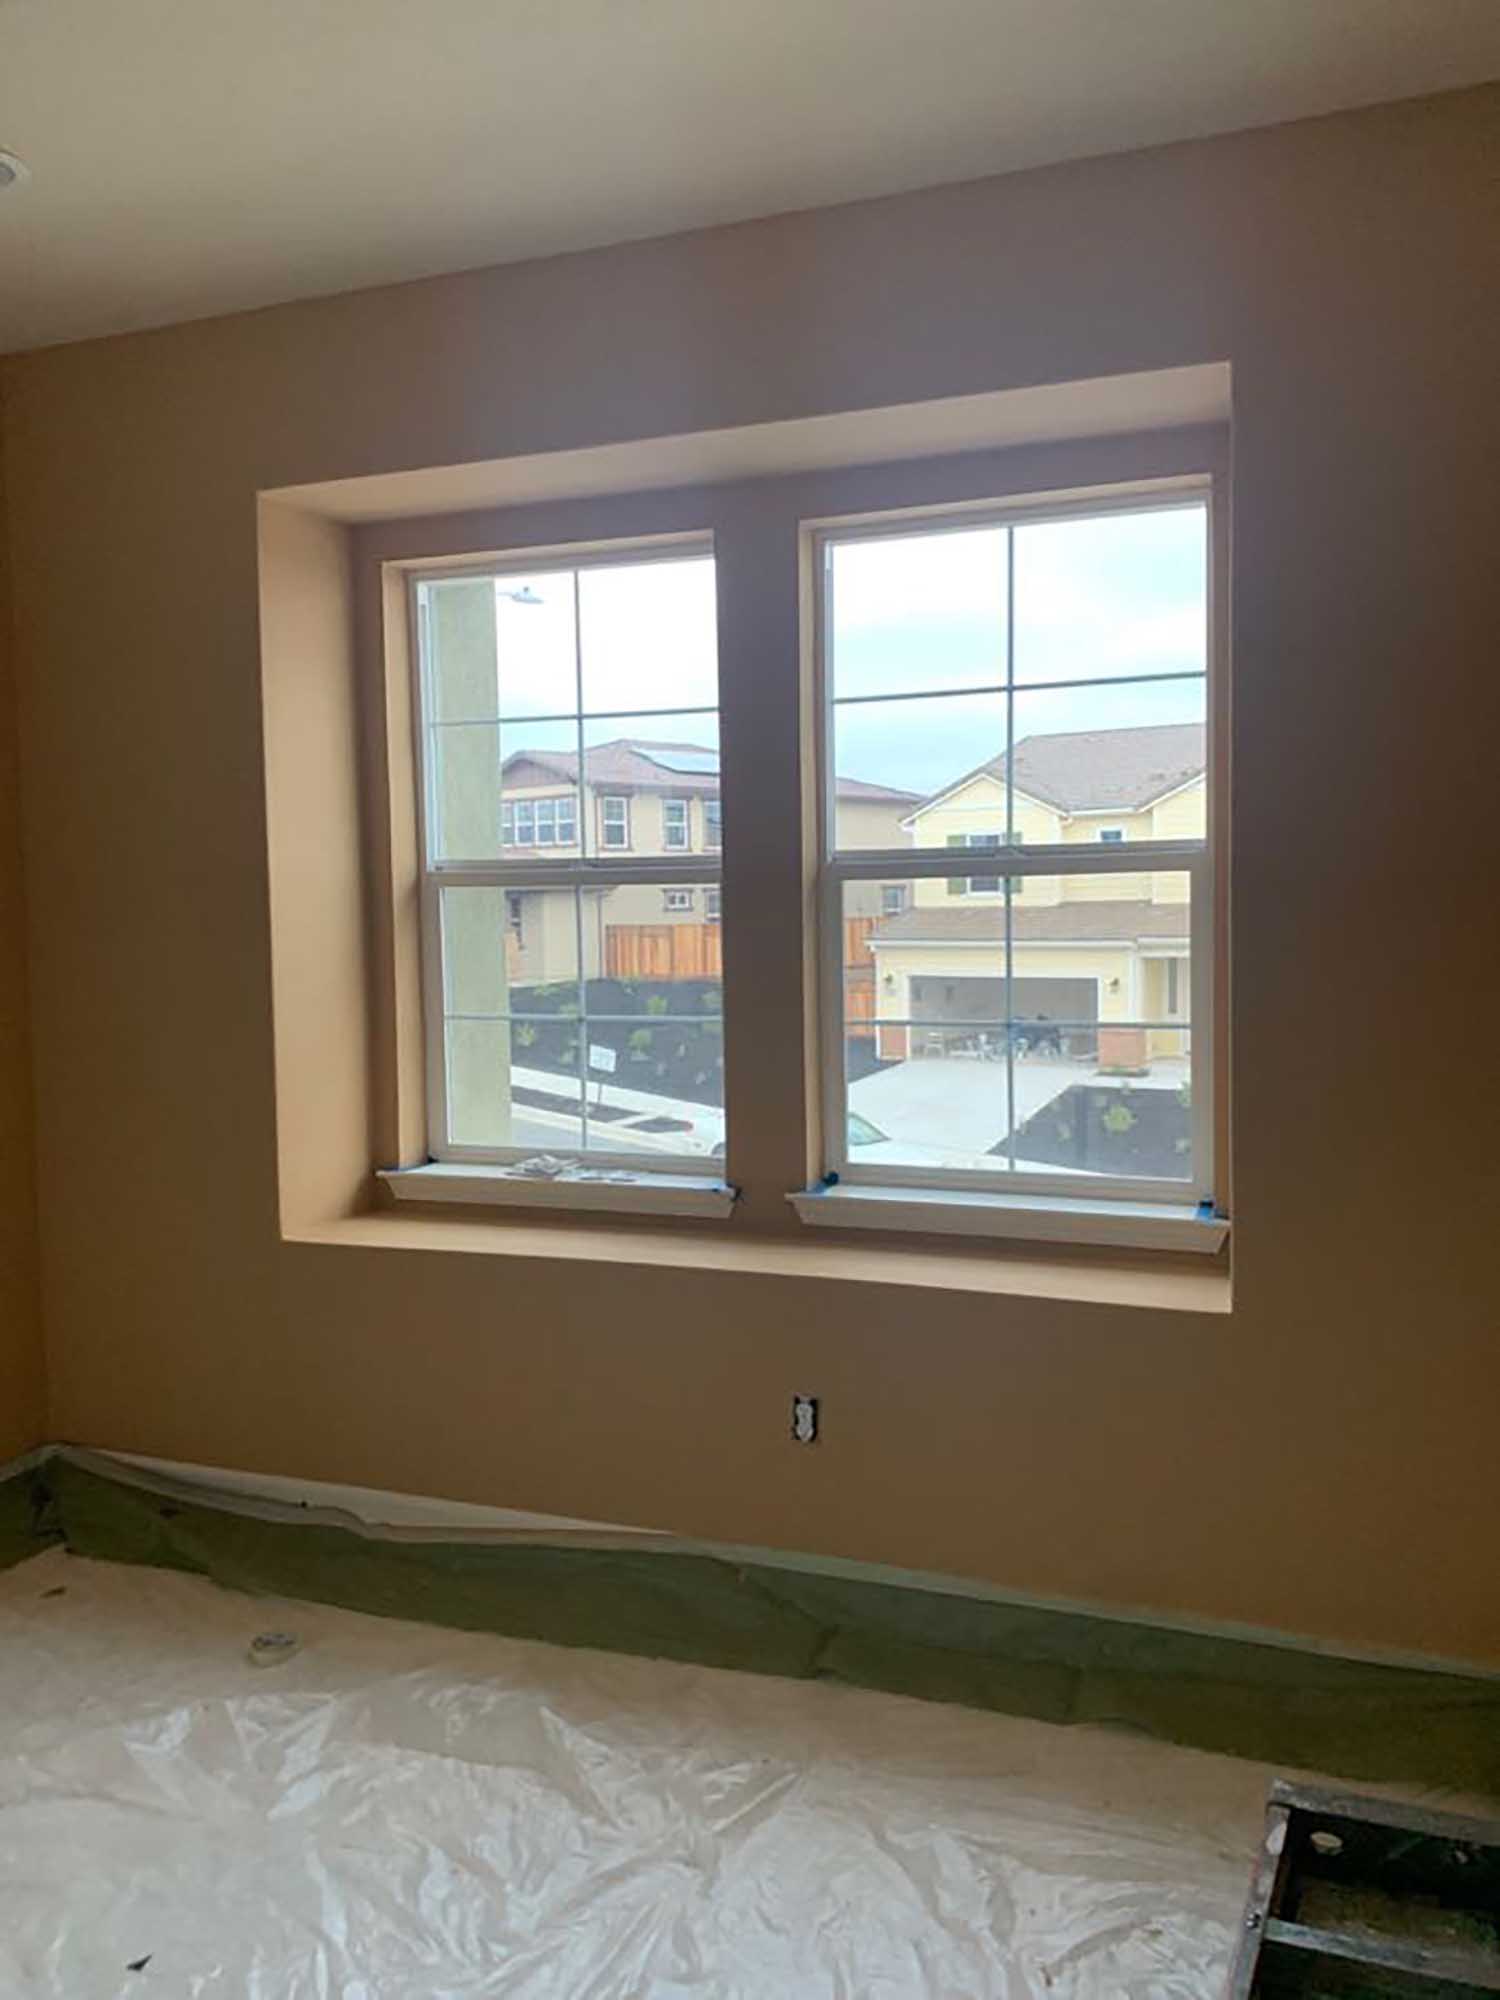 Affordable Home Window Film for Antioch, CA, installed by ClimatePro. Free estimates on window film for the entire San Francisco Bay Area.